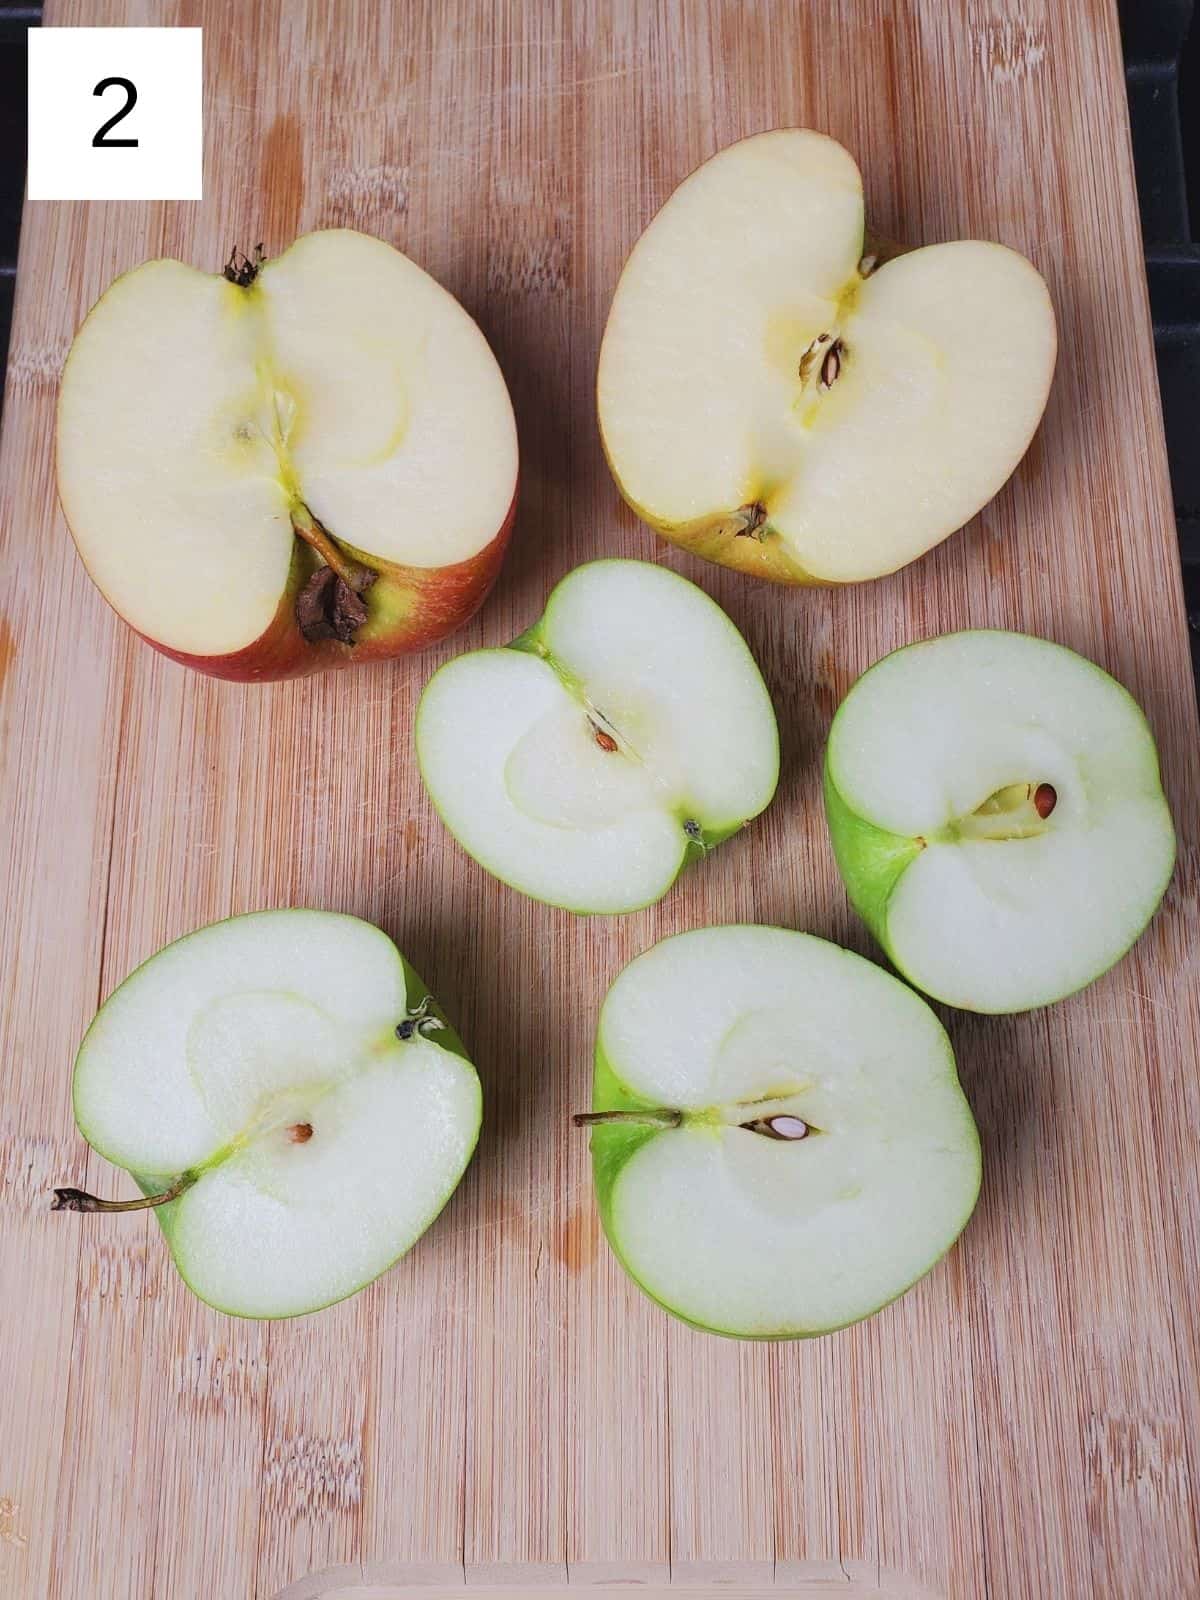 six halves of apples on a wooden cutting board.